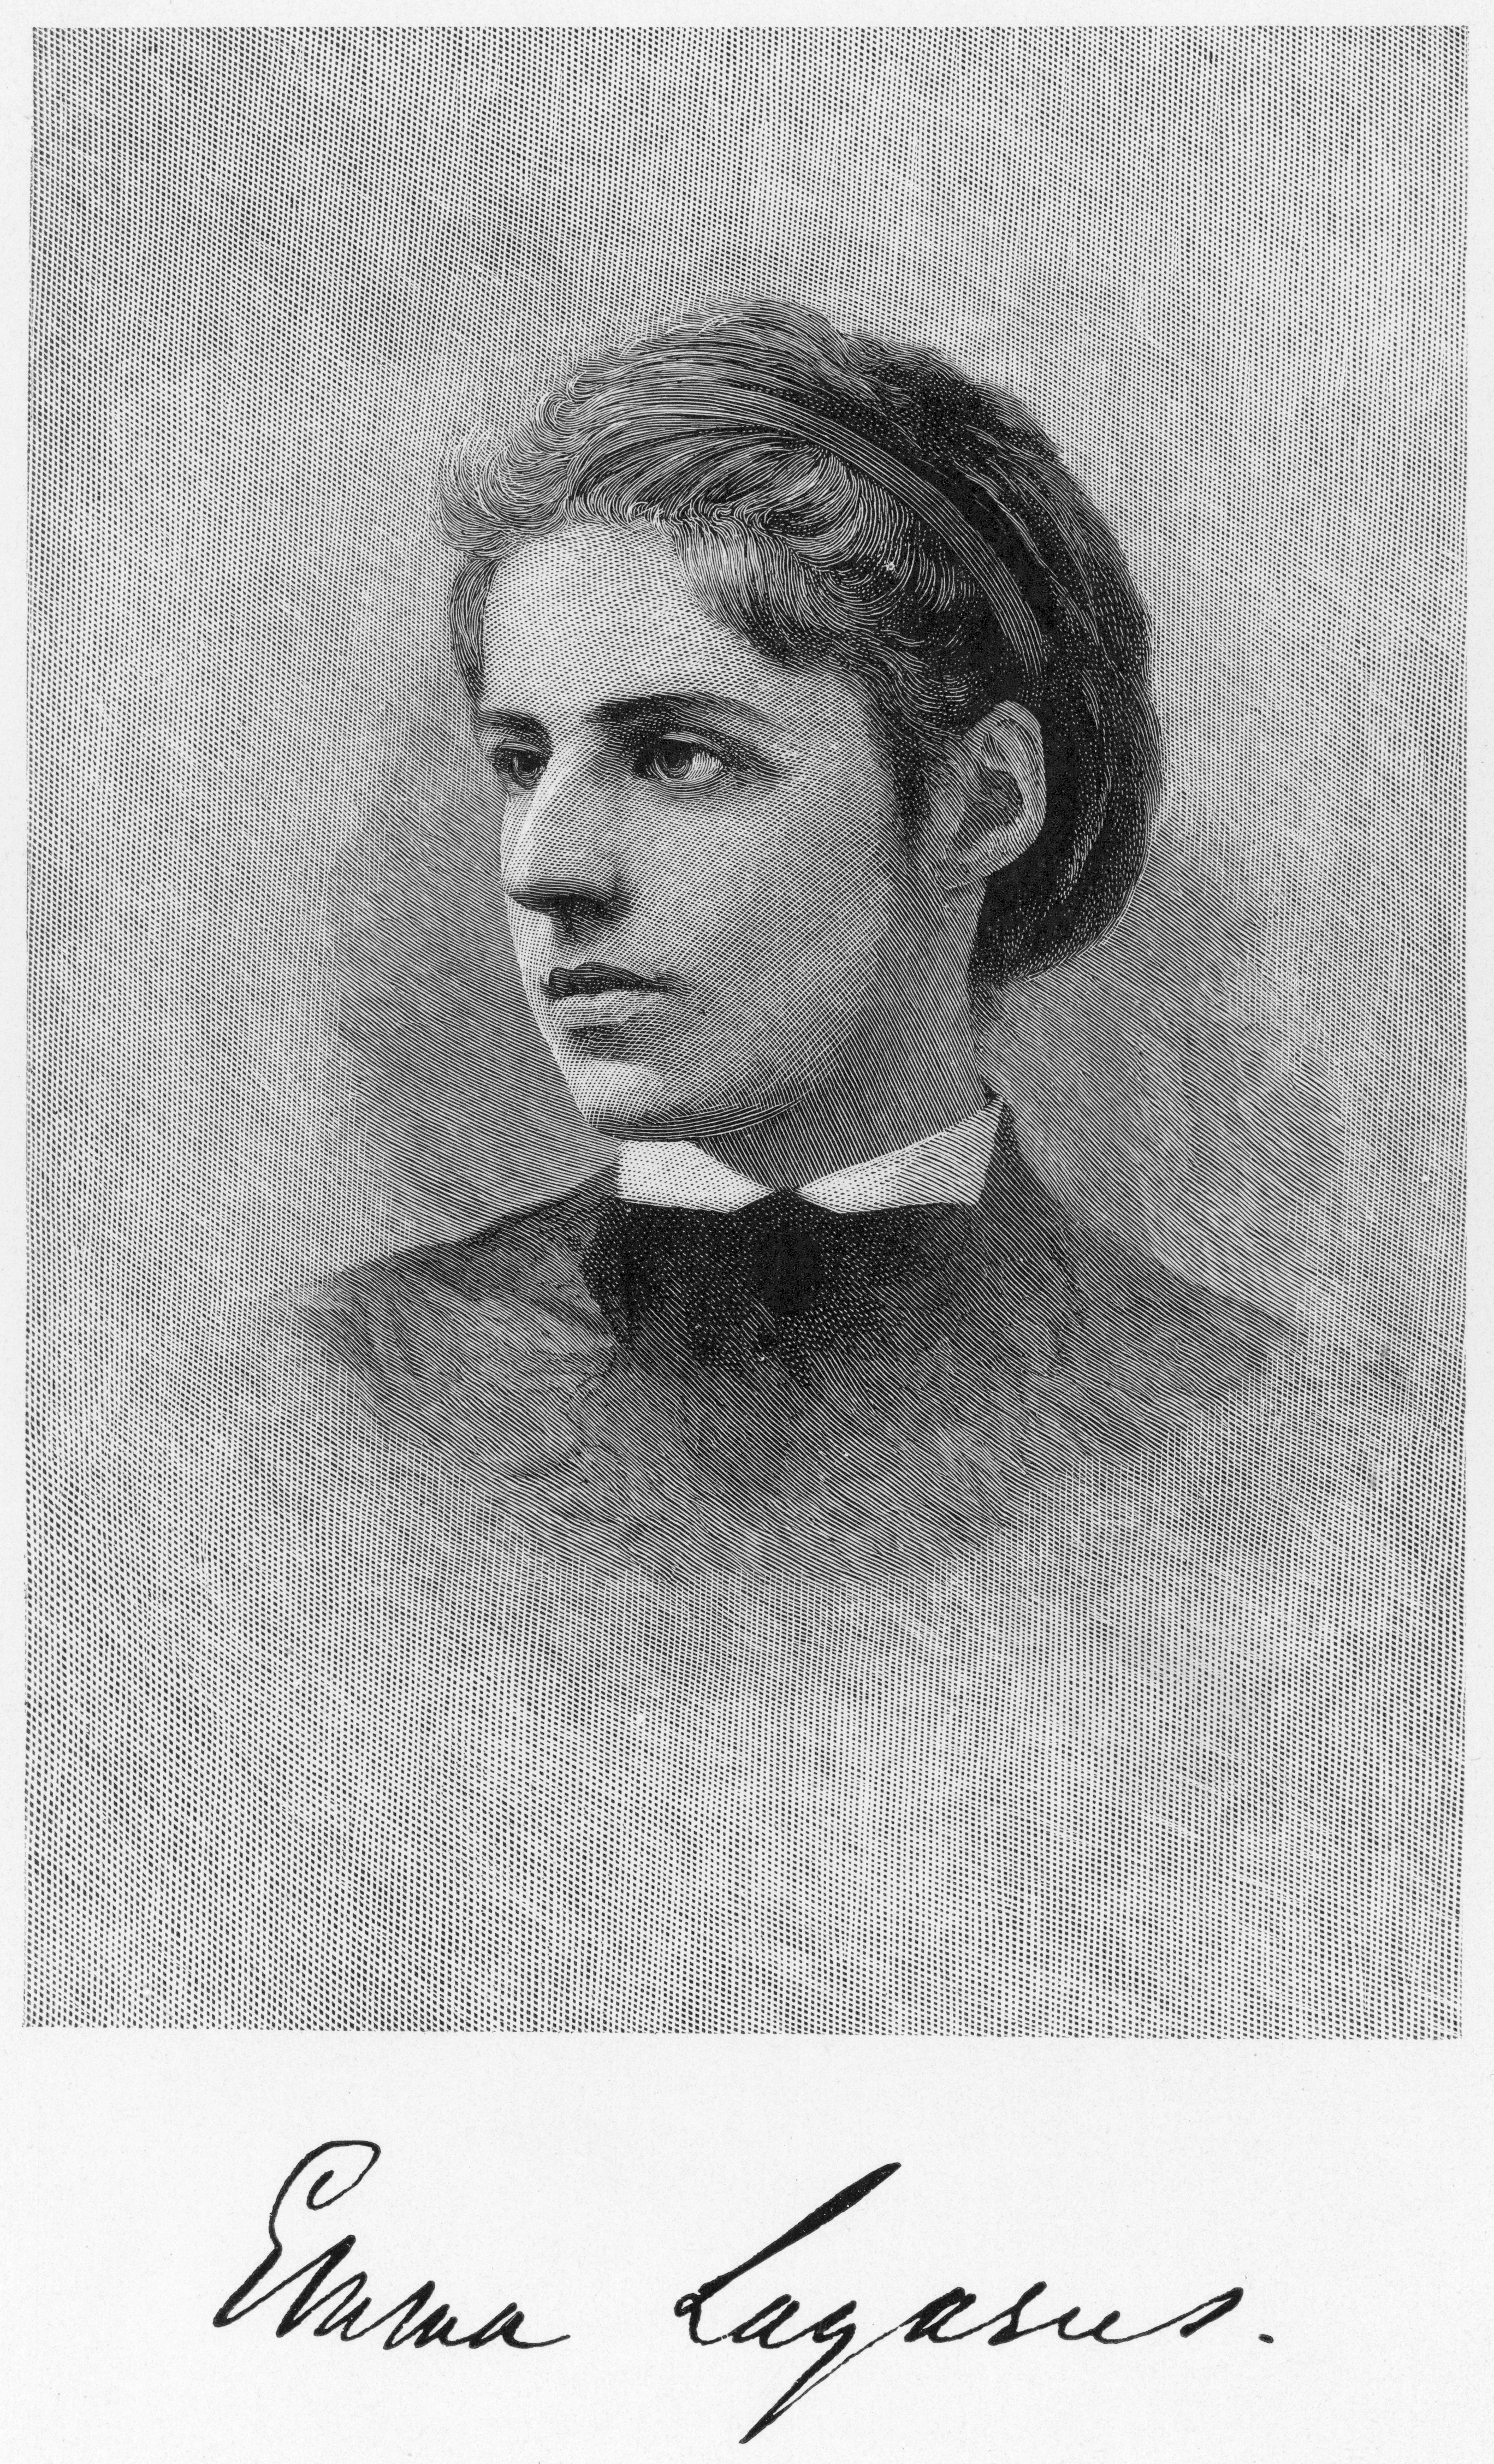 Circa 1880, American poet and essayist Emma Lazarus (1849-1887), who wrote 'The New Colossus,' the poem later engraved on the base of the Statue of Liberty. (Hulton Archive/Getty Images)